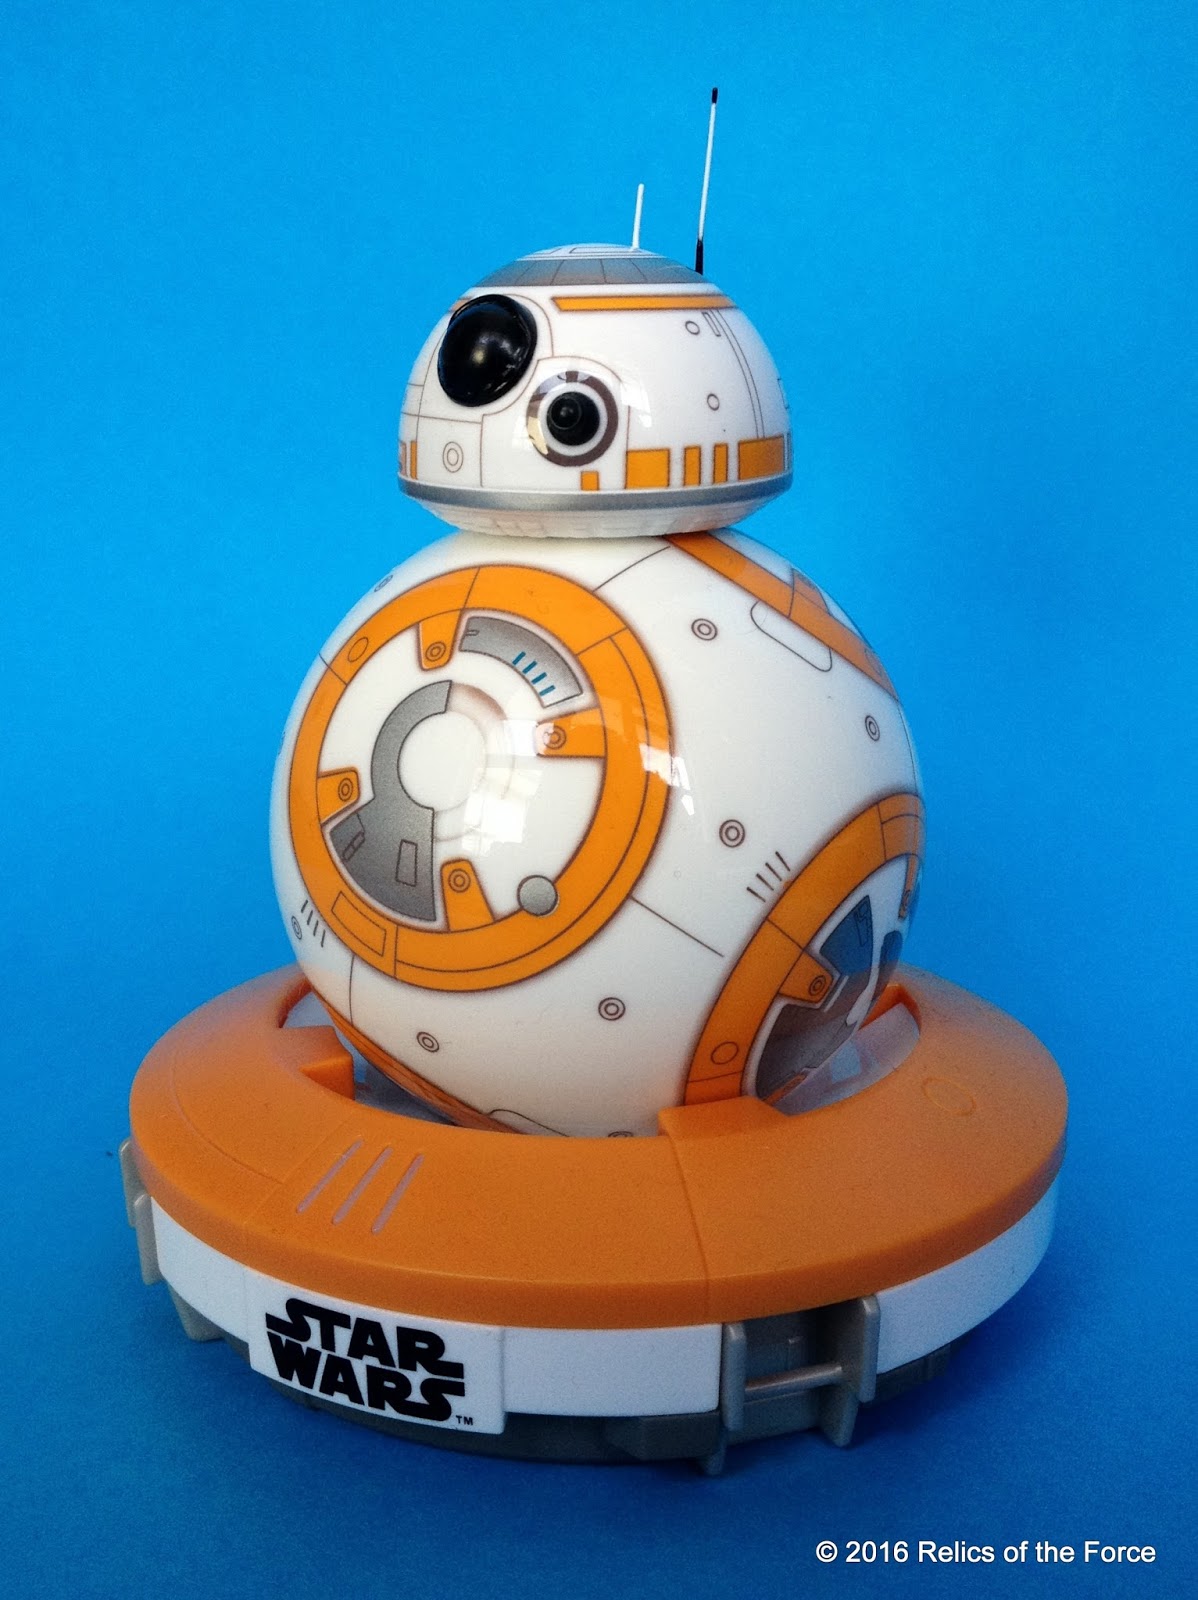 Relics of the Force: Sphero BB-8 App-Enabled Droid